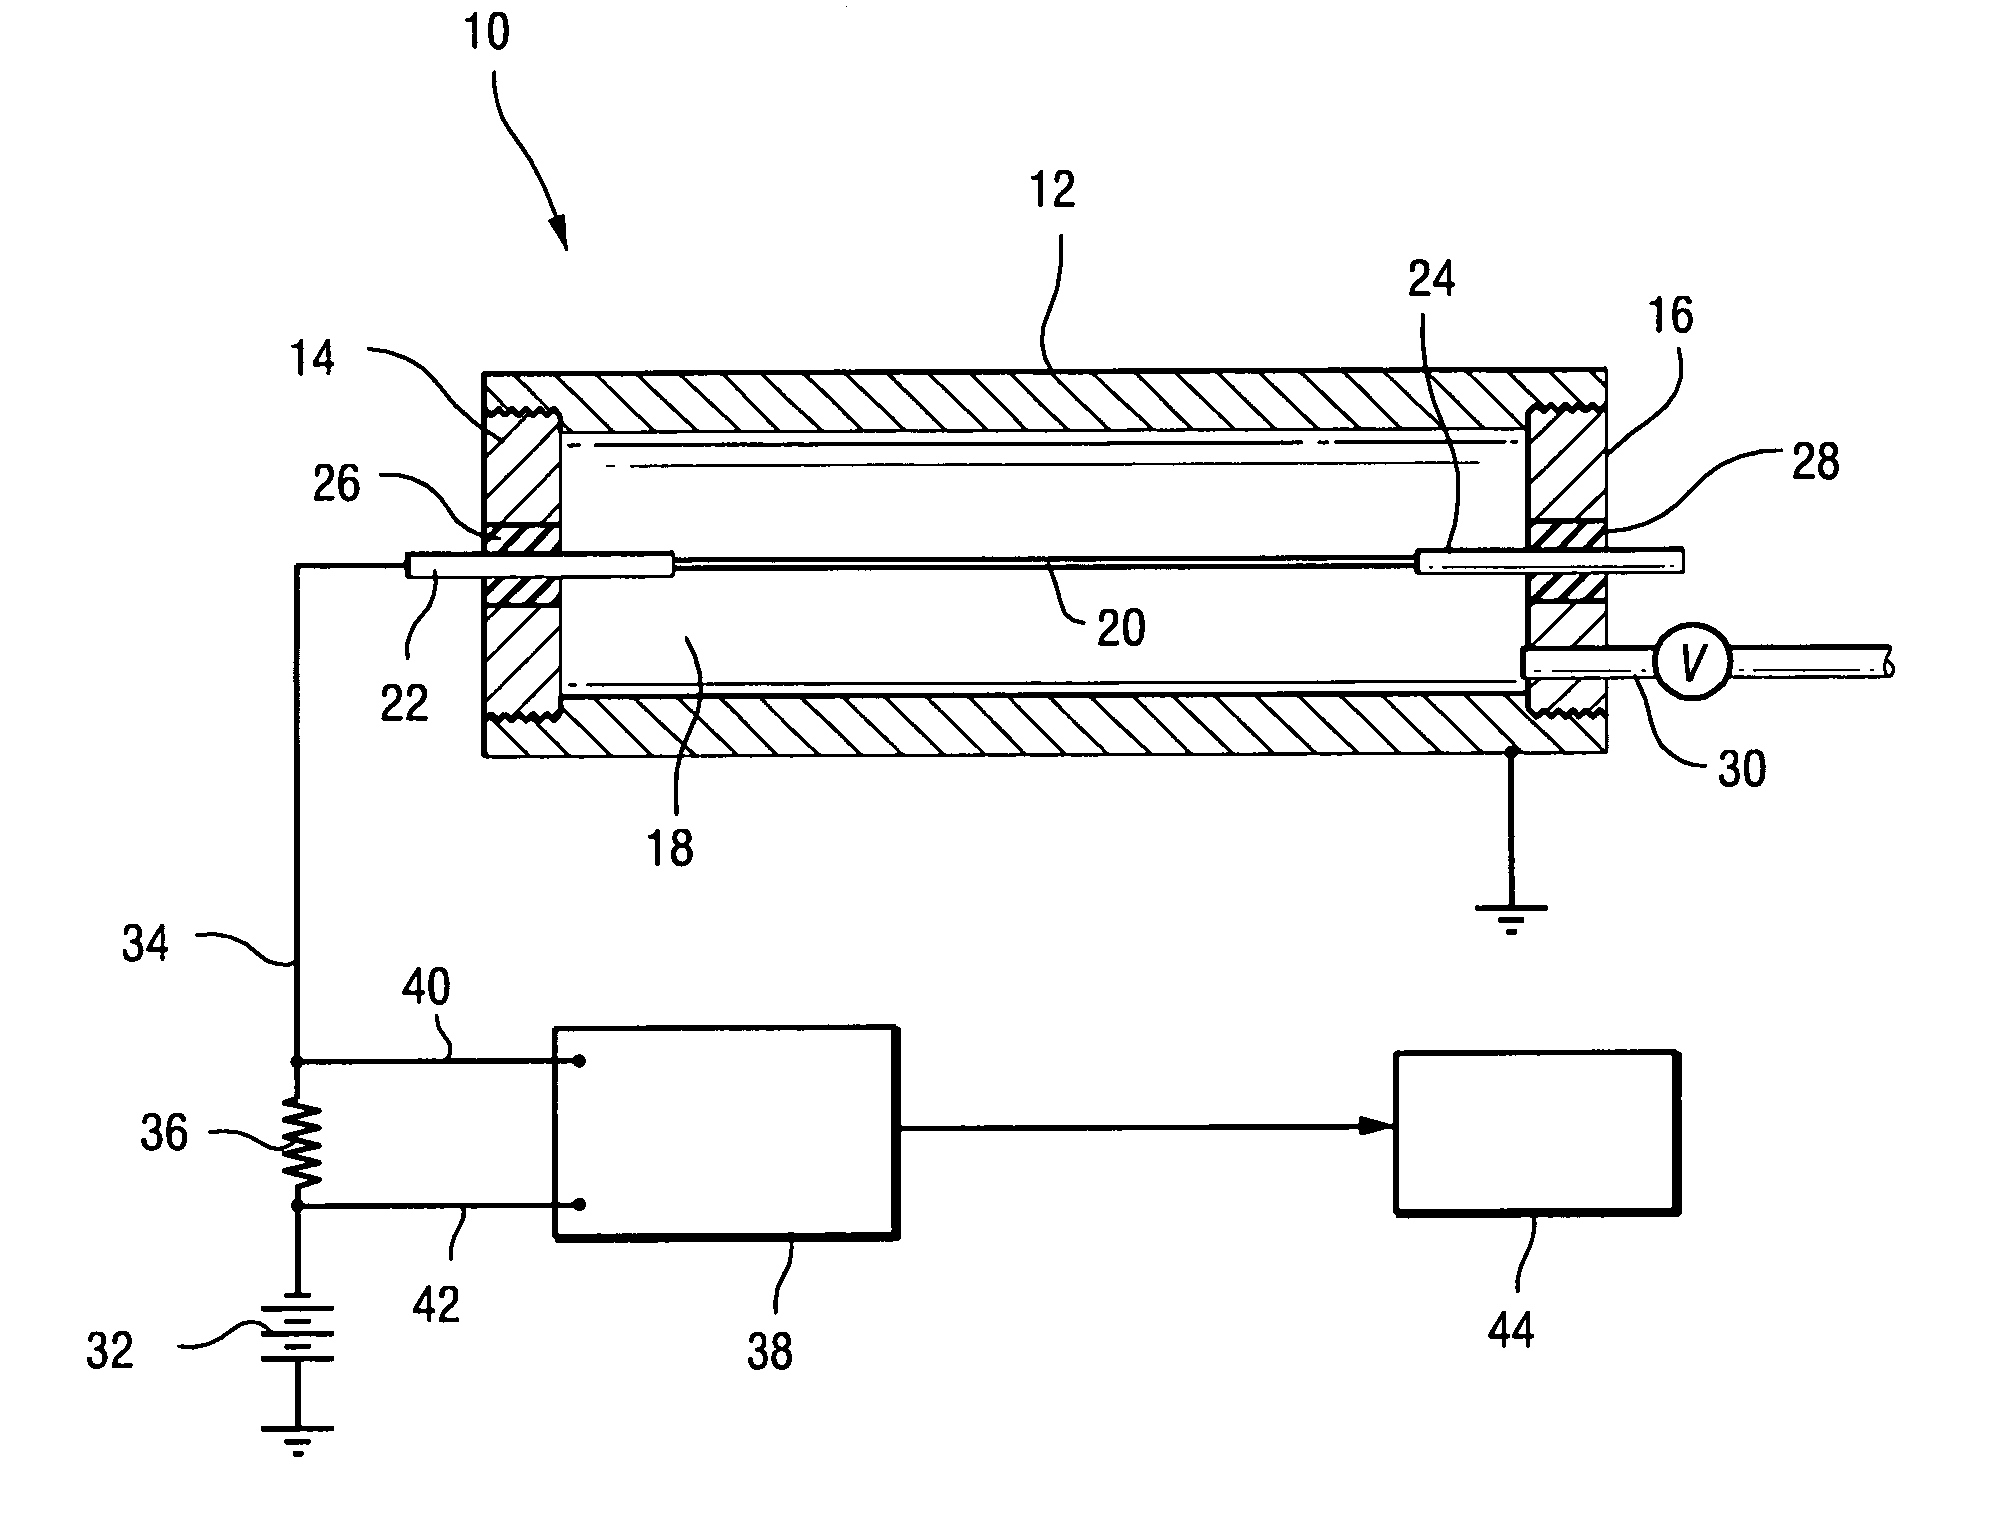 He-3 neutron proportional counter with internal leakage detection and related method